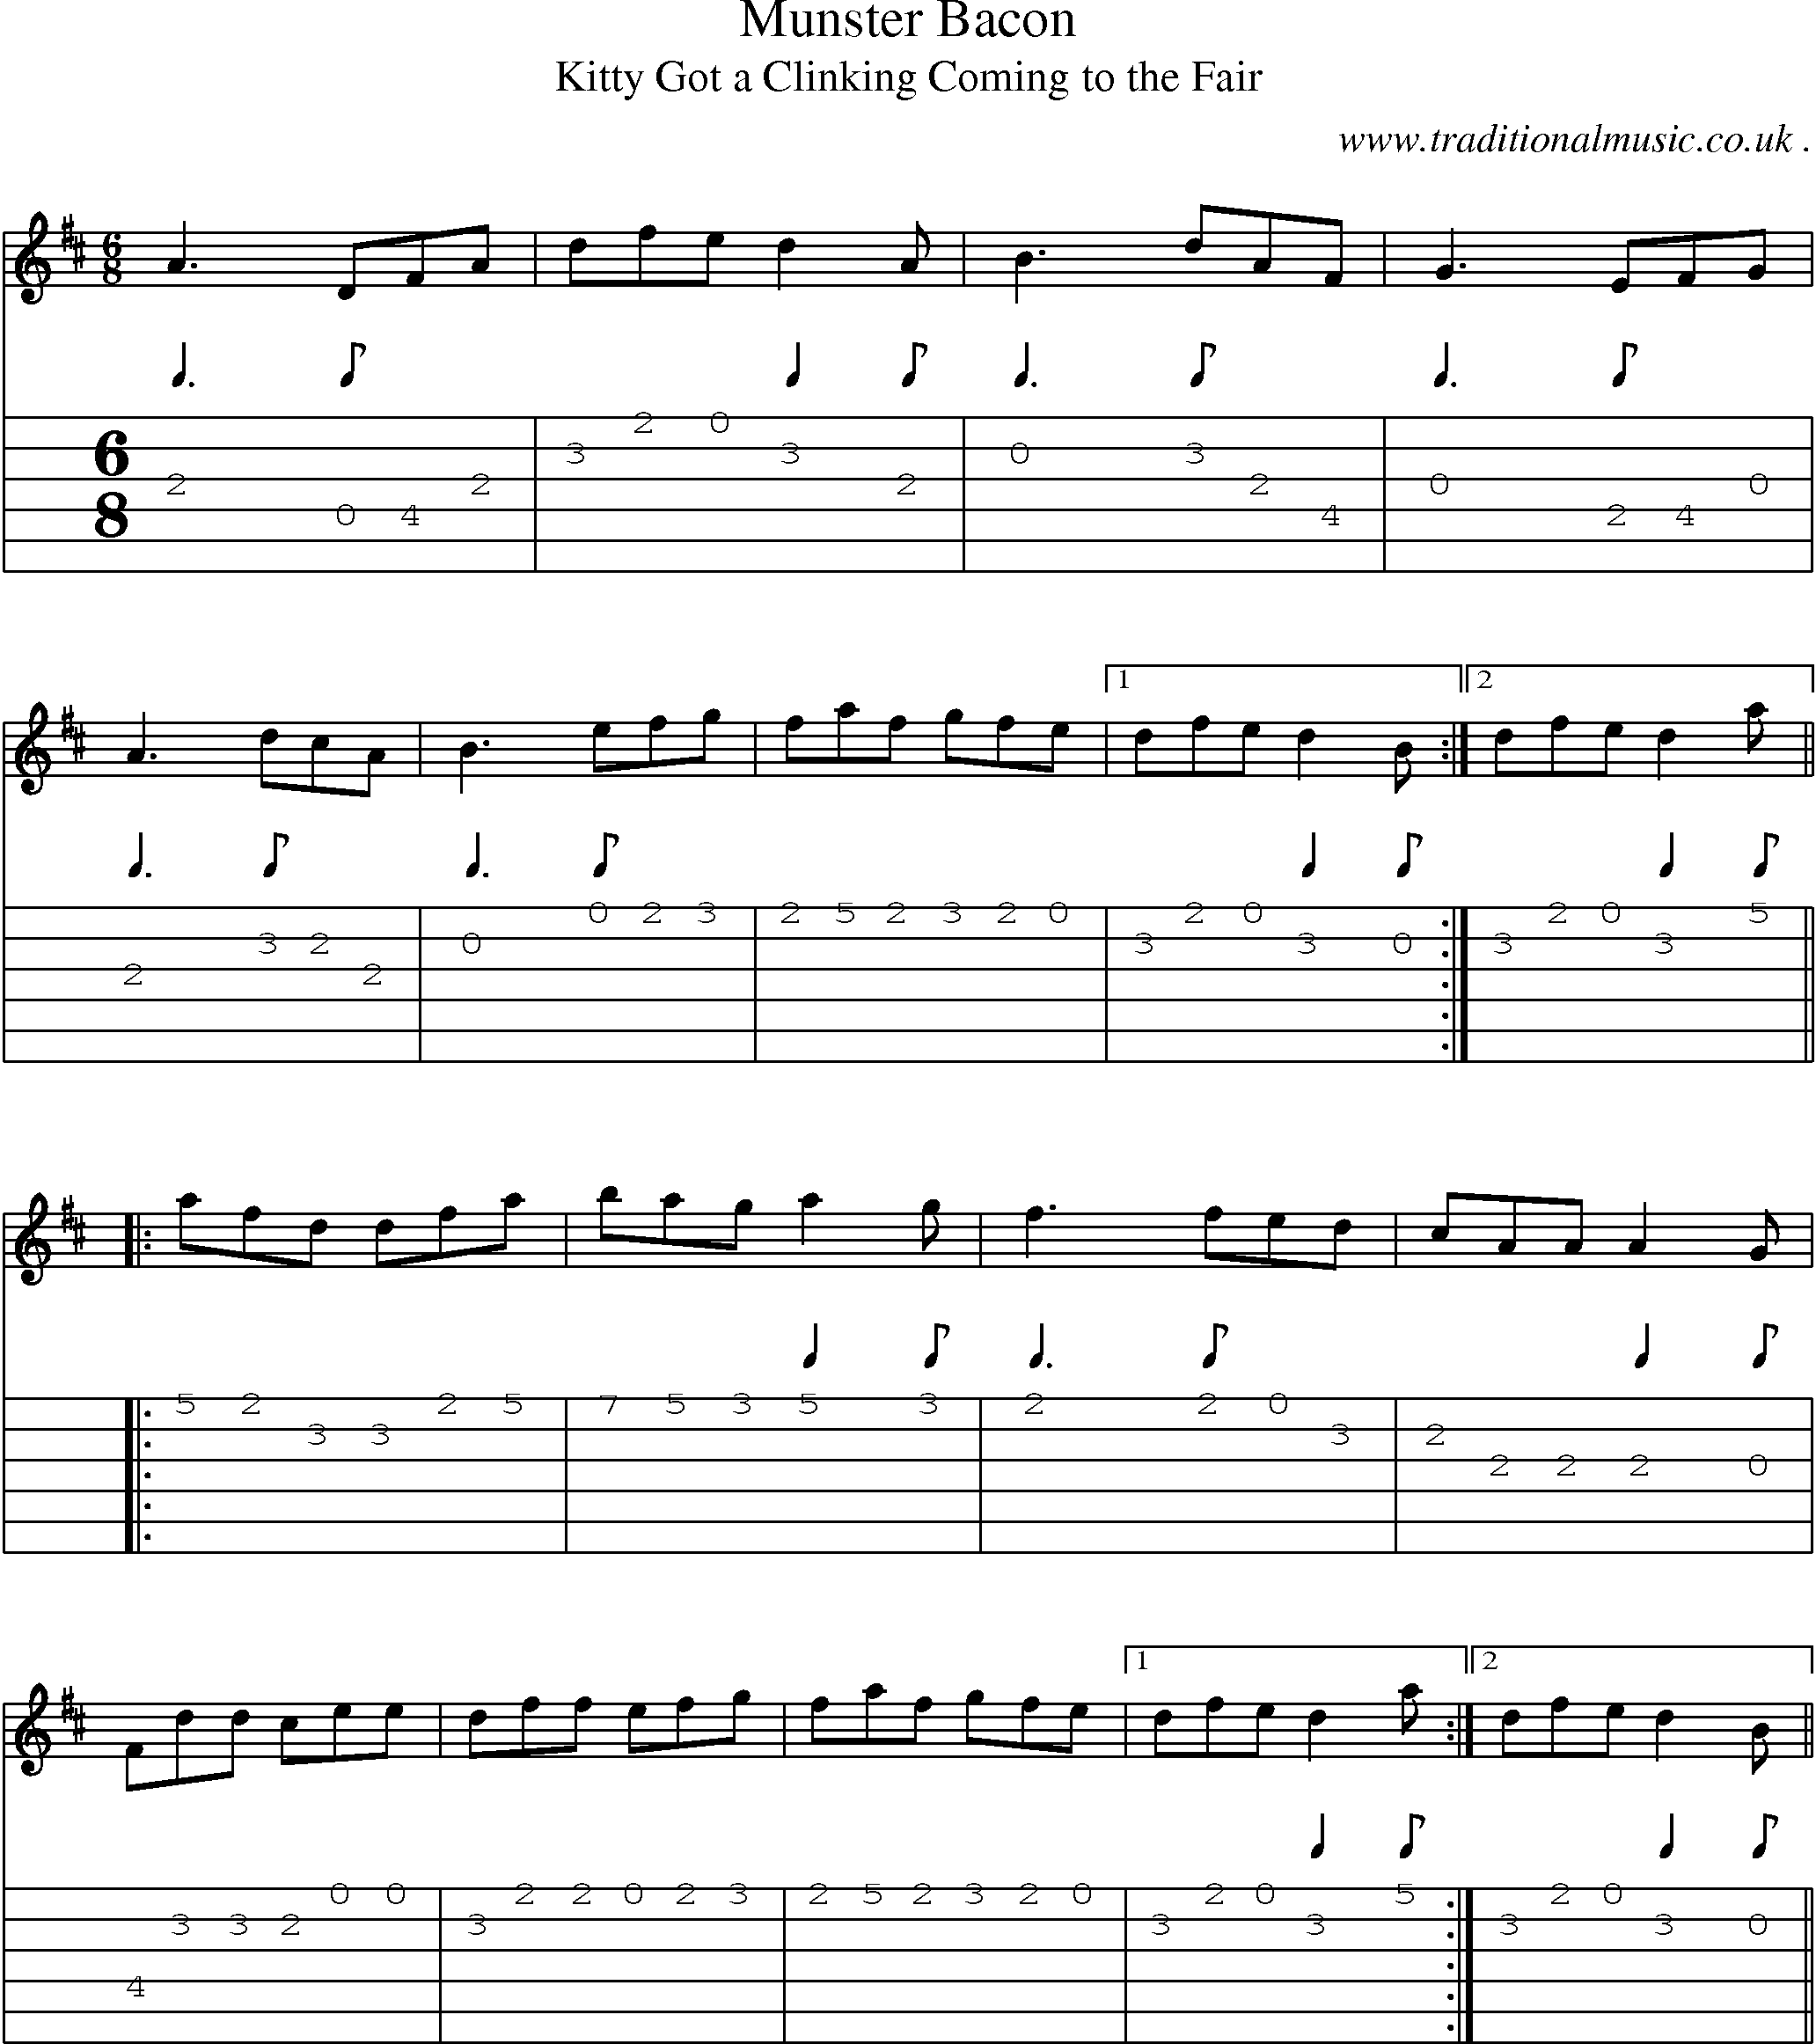 Sheet-Music and Guitar Tabs for Munster Bacon